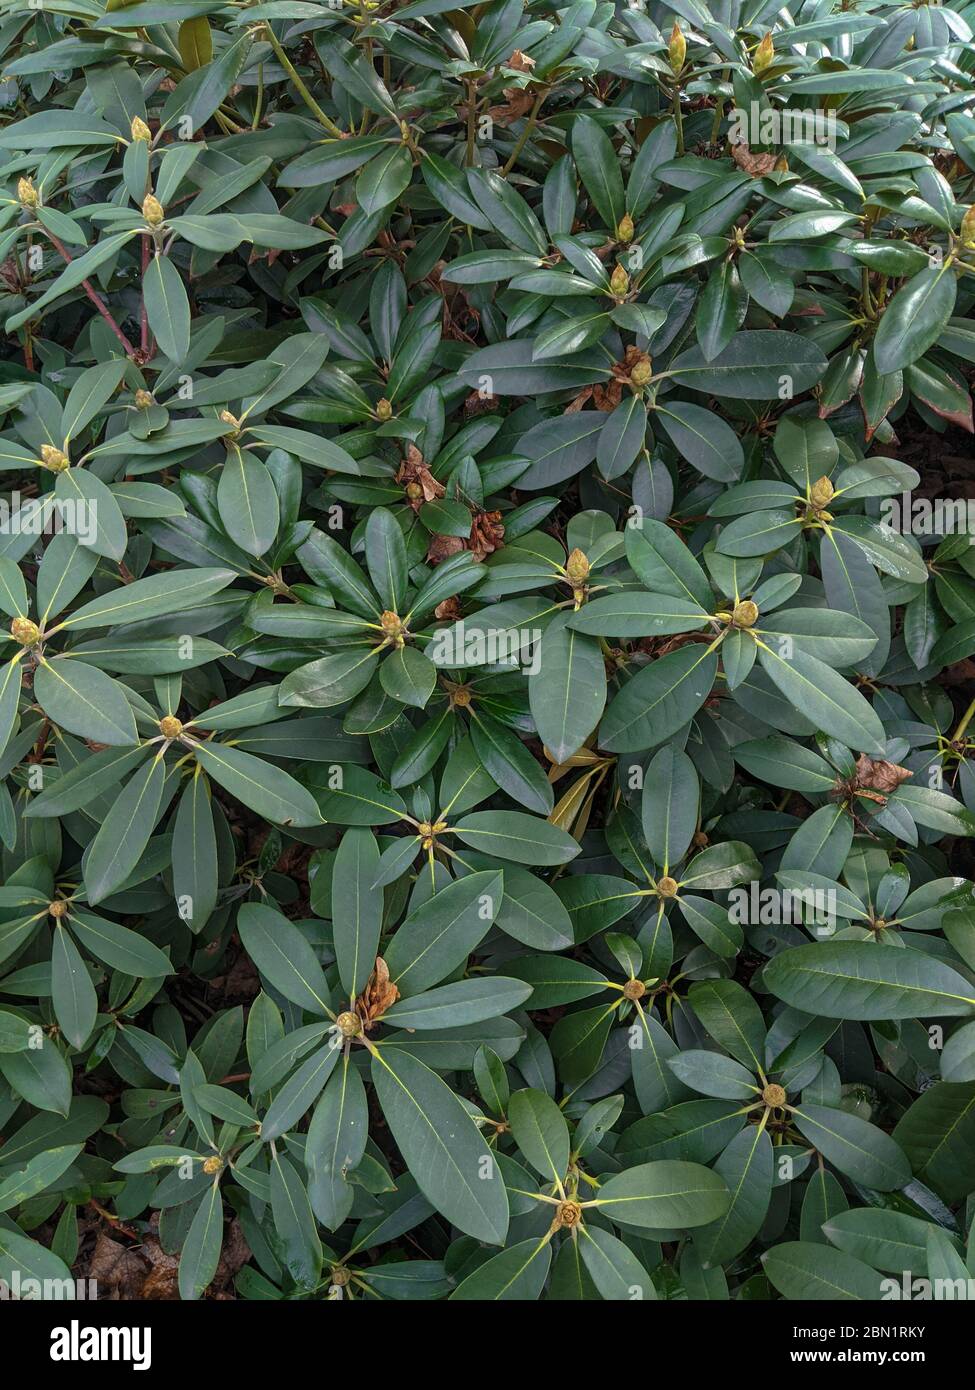 Luxuriant bush of rhododendron, full of buds in a lush green foliage Stock Photo